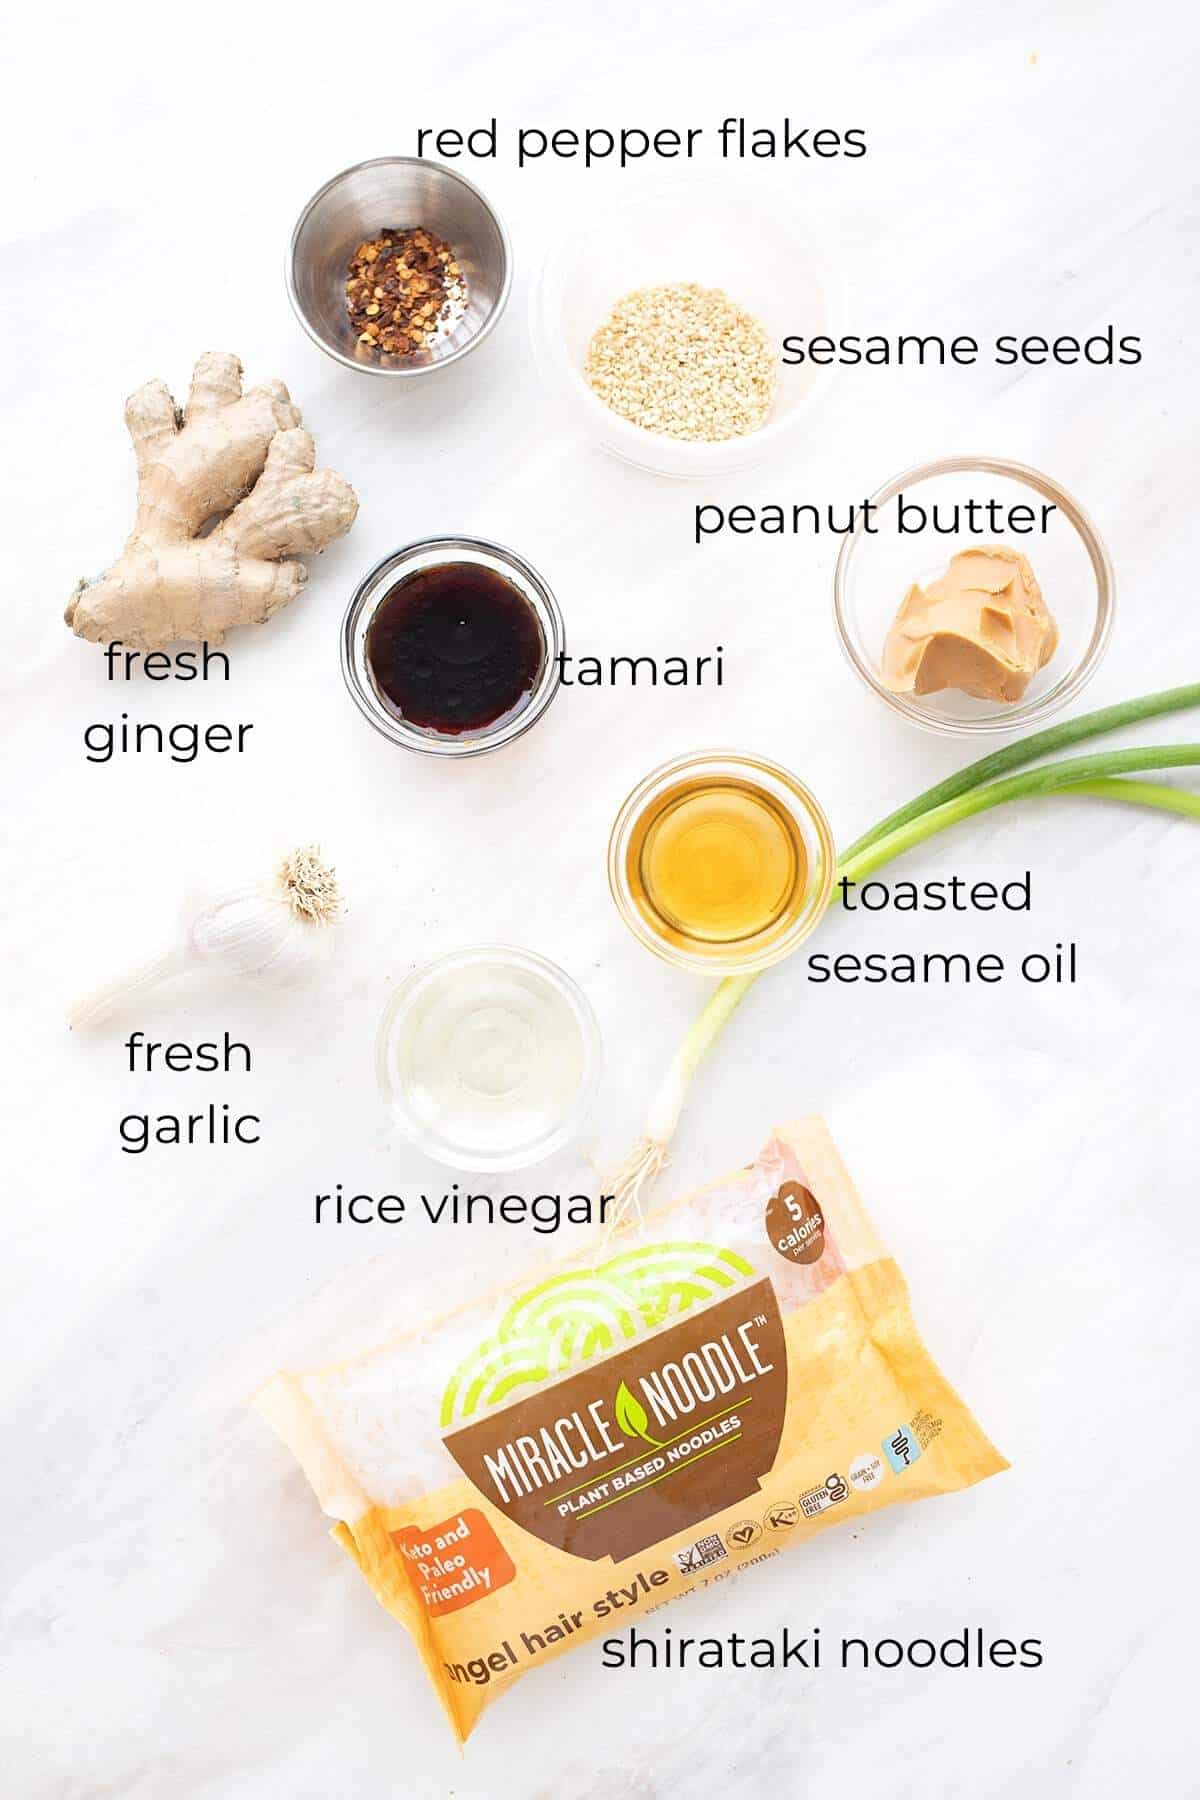 Top down image of the ingredients needed for keto sesame noodles.